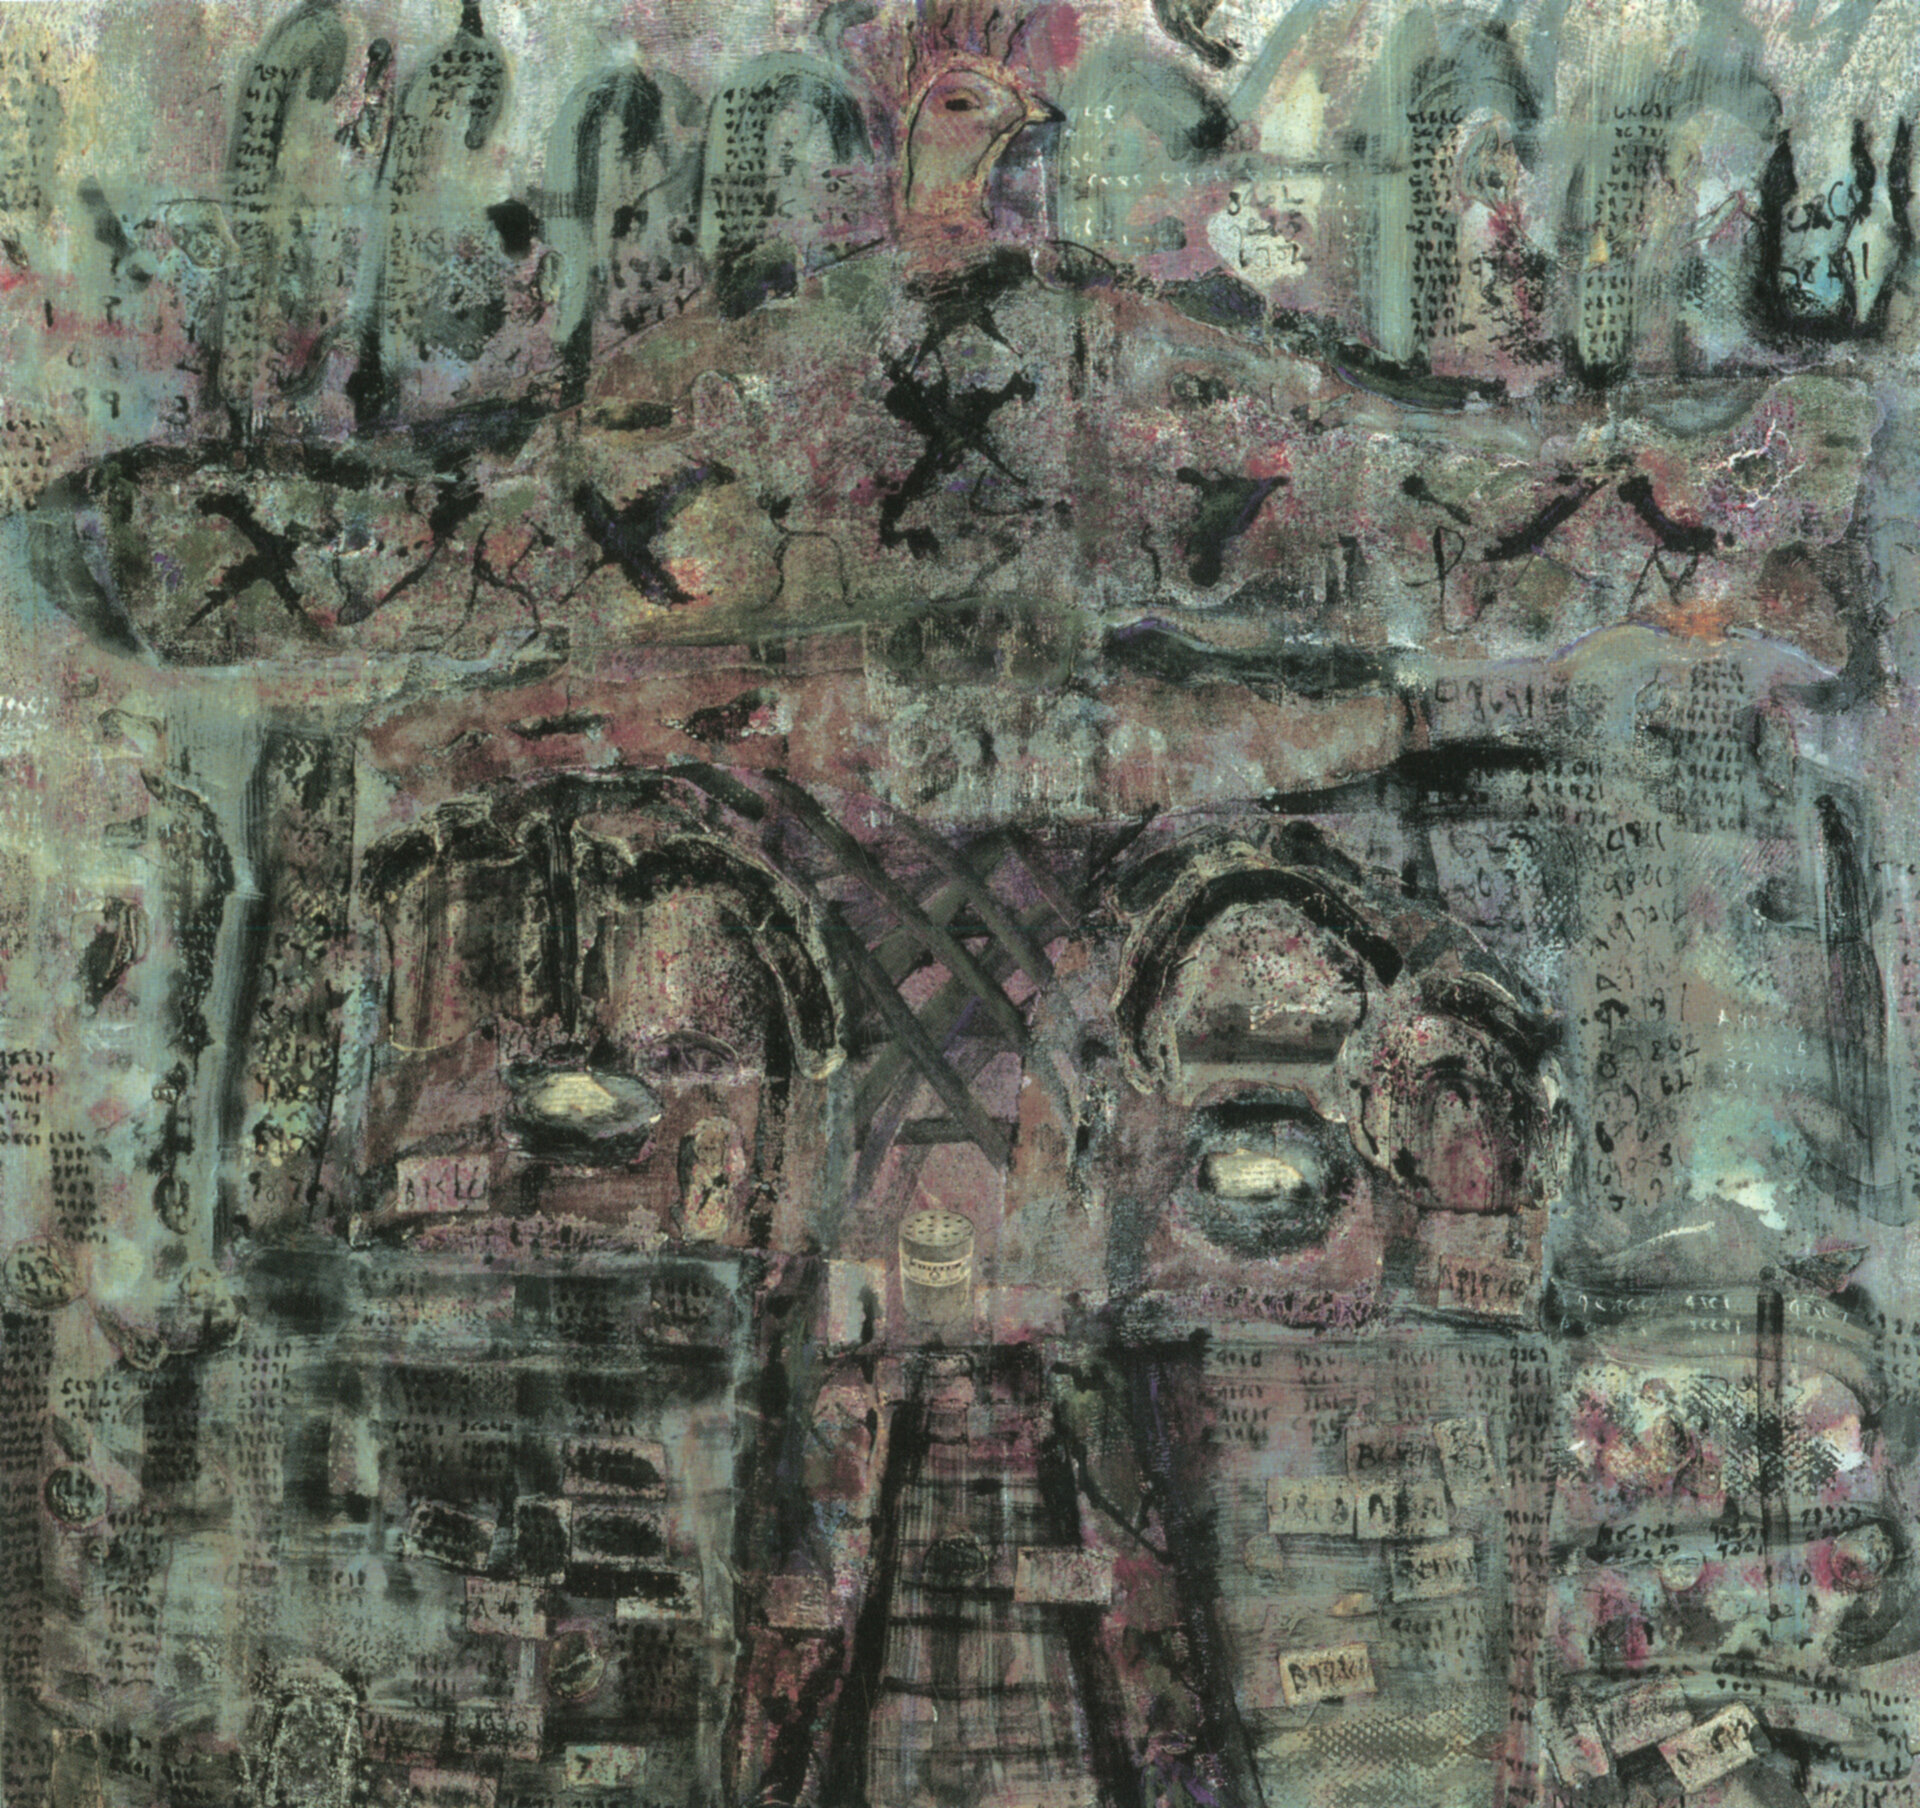  One of the first exhibits I curated included works by Alice Lok Cahana. Her work bore witness to her experience of surviving concentration camps during the Holocaust and her art was a kaddish for those who did not survive. She communicated that expe